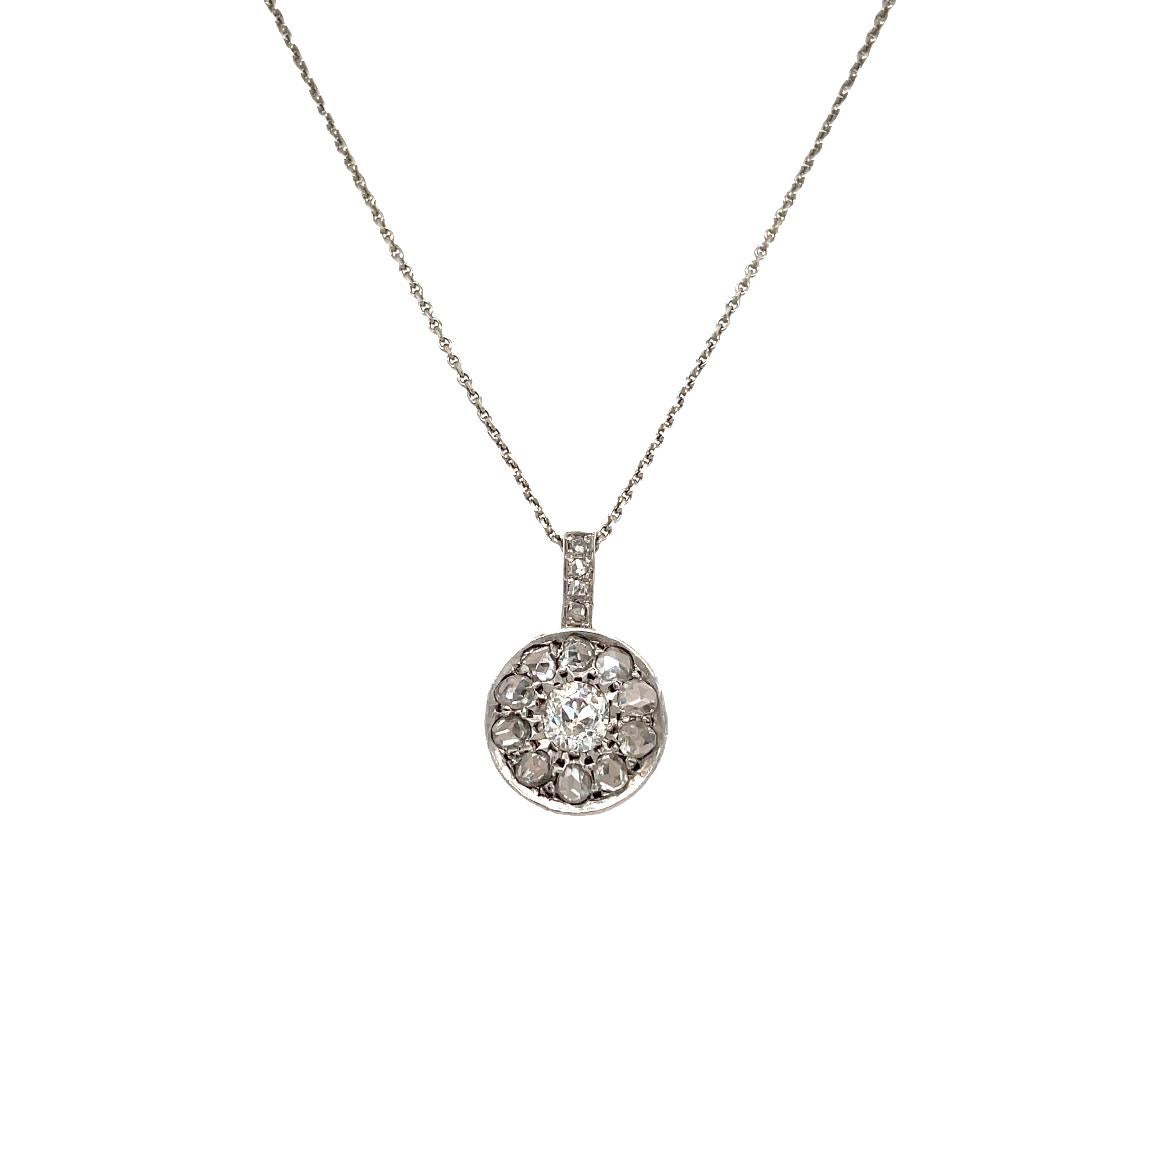 Genuine antique 1930's Art Deco 18k white gold necklace set with one large Old mine cut Diamond in the center, weight 0,90 carat graded I color Vs2 clarity, and surrounded by rose cut diamonds, total weight 1.20 carats.

CONDITION: Pre-owned -